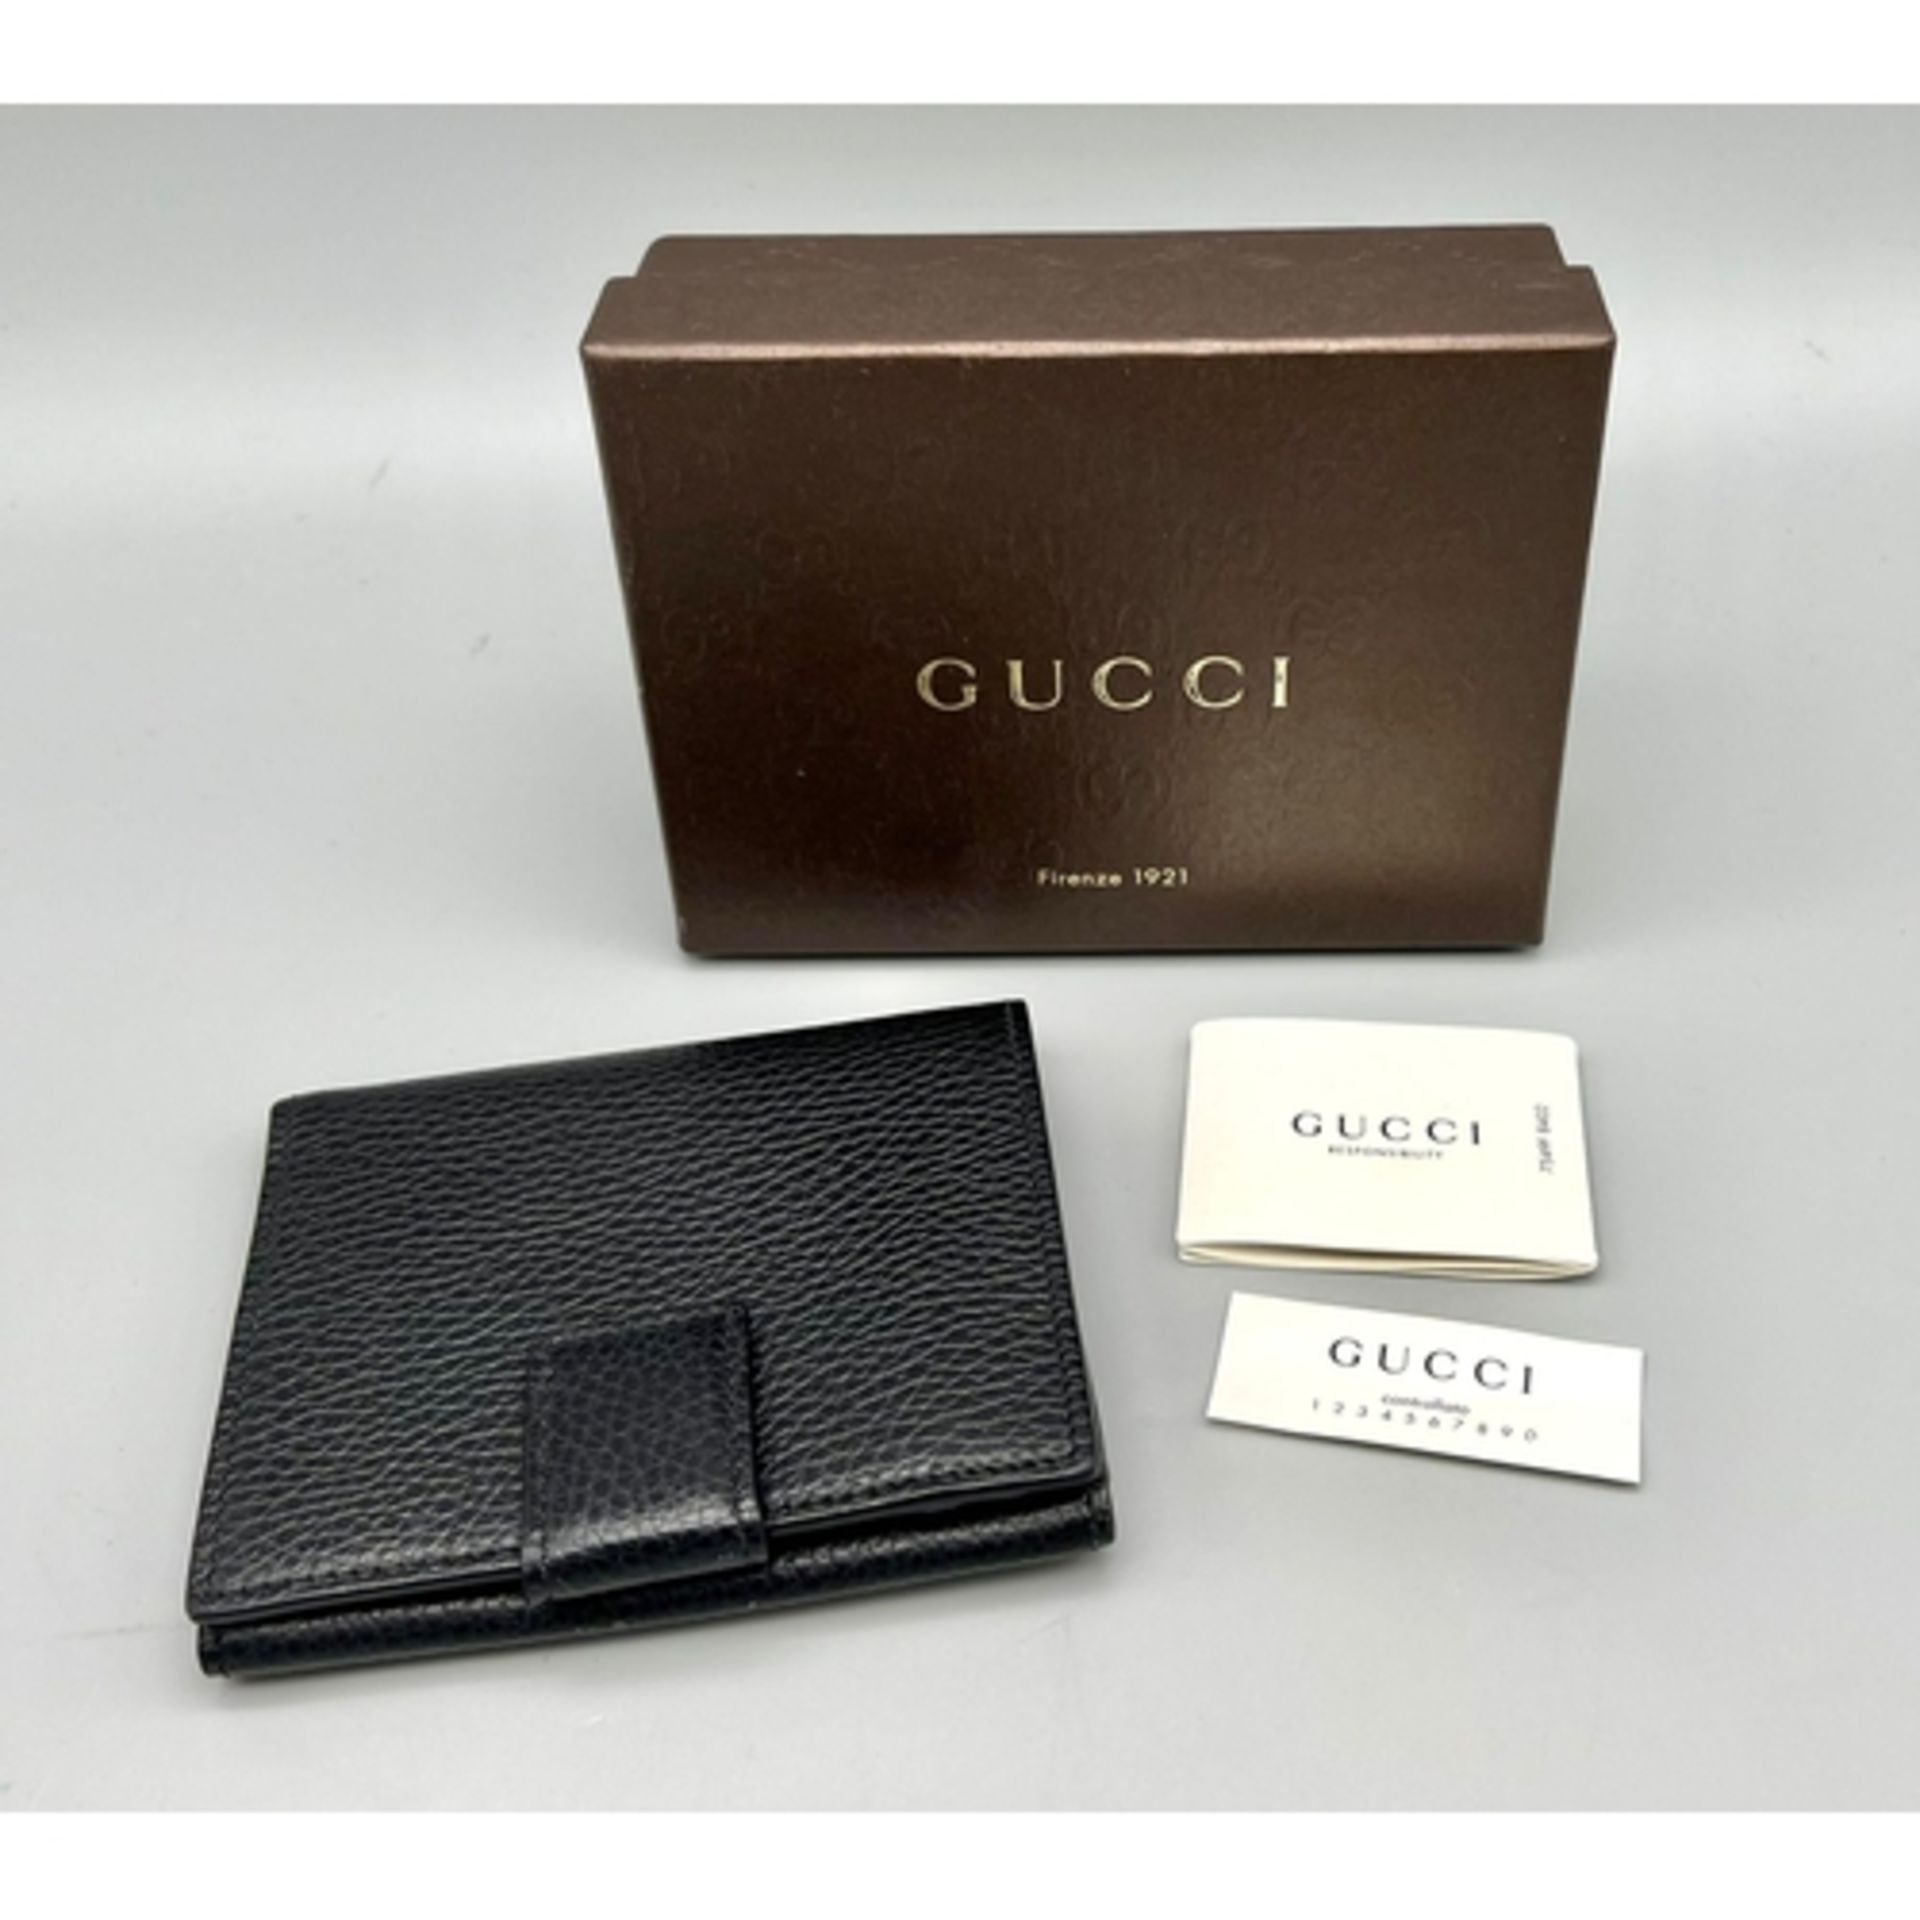 A Gucci Blue Leather Textured Wallet. Clip open exterior pocket plus plenty of inner card space.